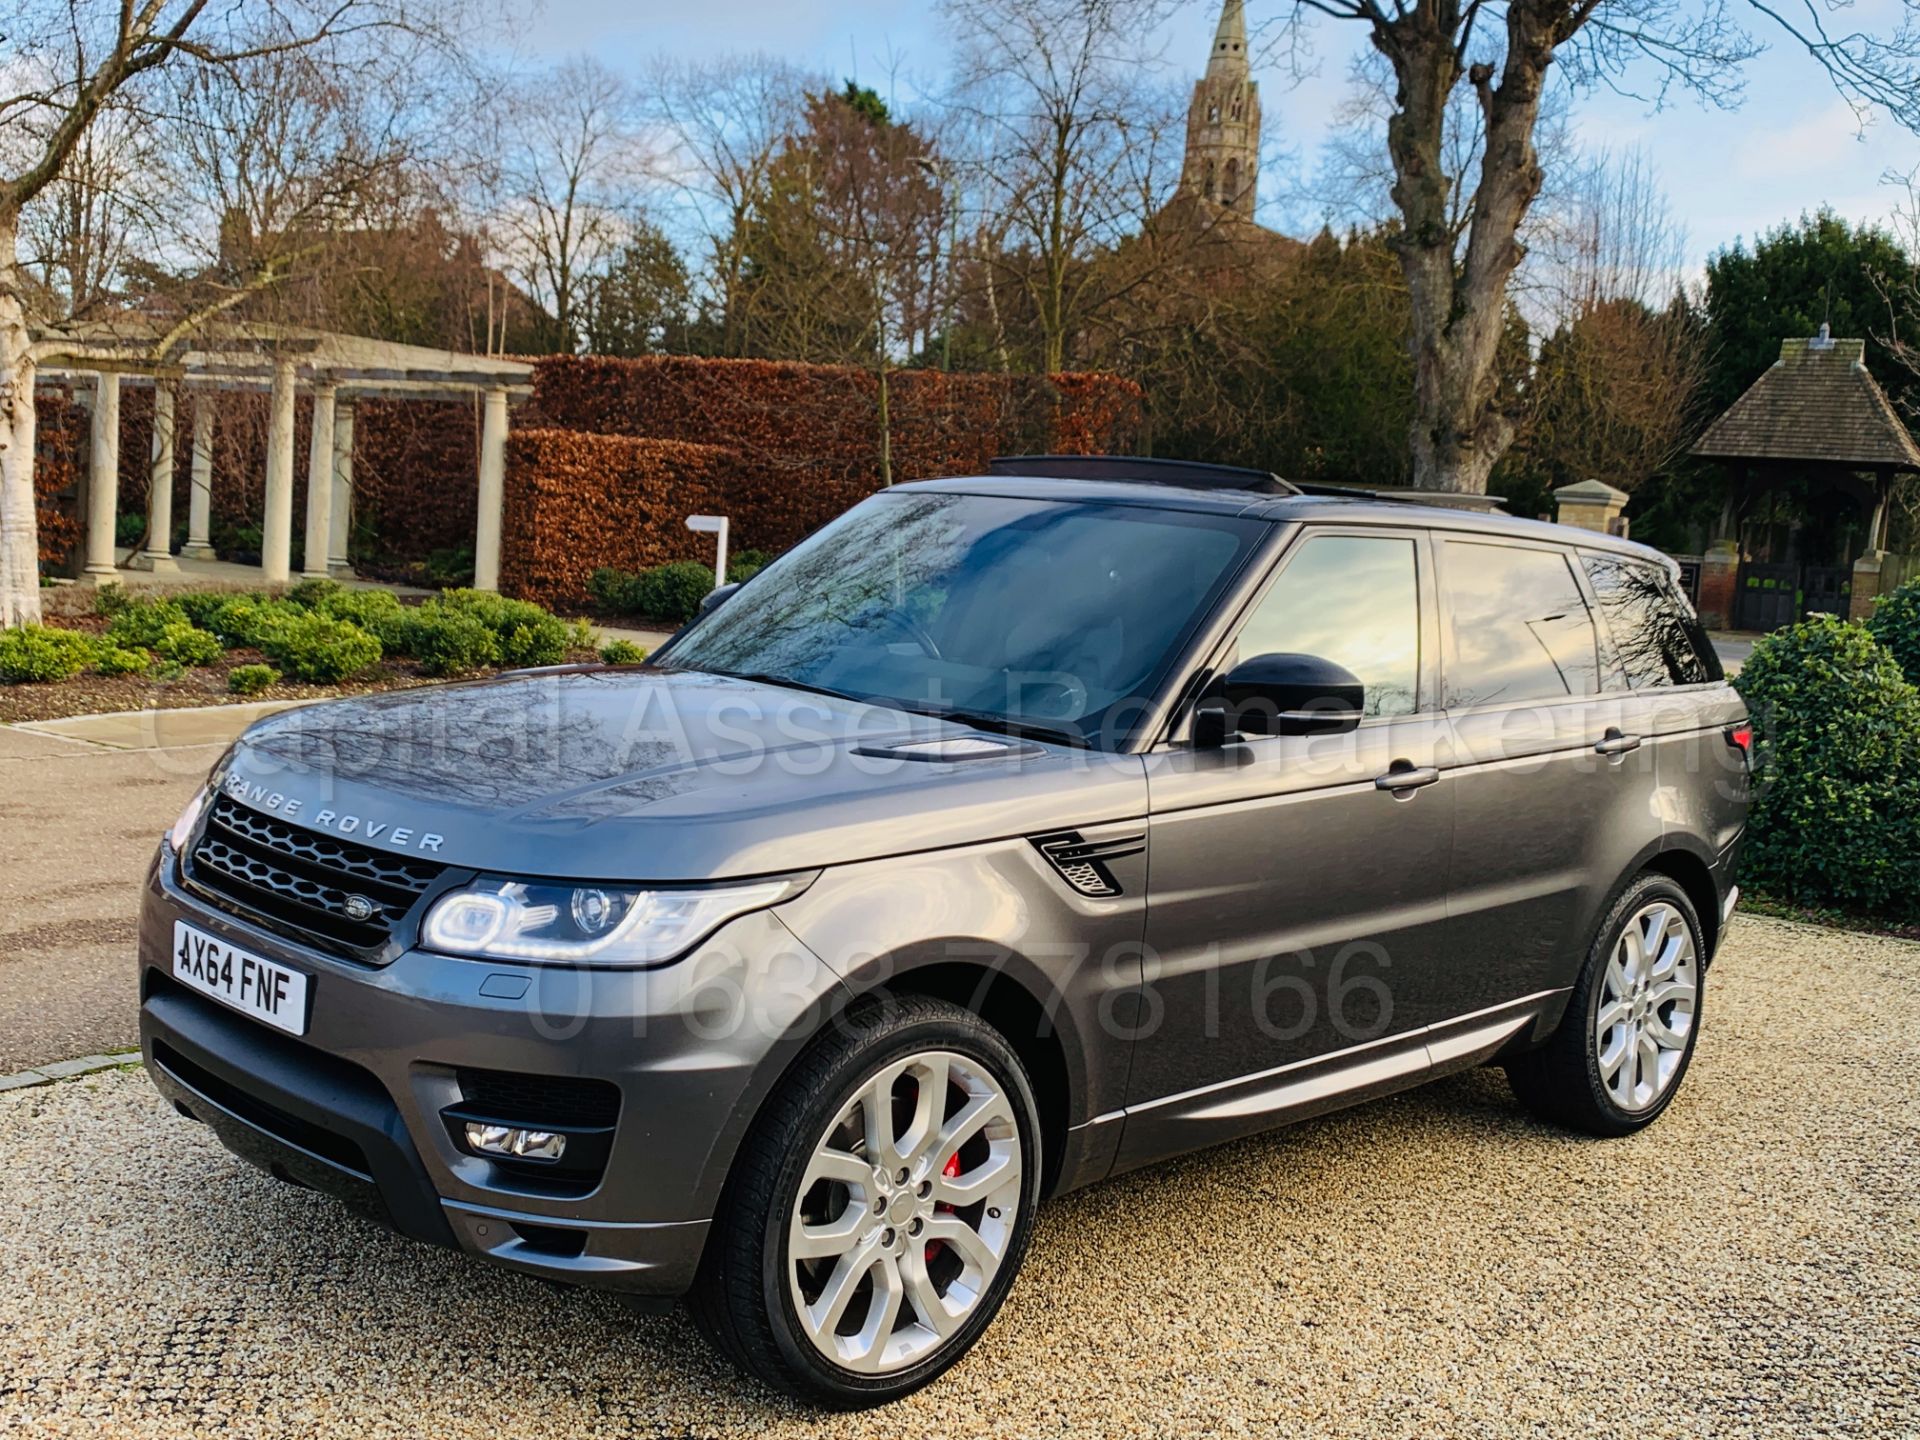 On Sale RANGE ROVER SPORT *AUTOBIOGRAPHY DYNAMIC* (2015 MODEL) '3.0 SDV6 - 8 SPEED AUTO' HIGE SPEC - Image 10 of 85